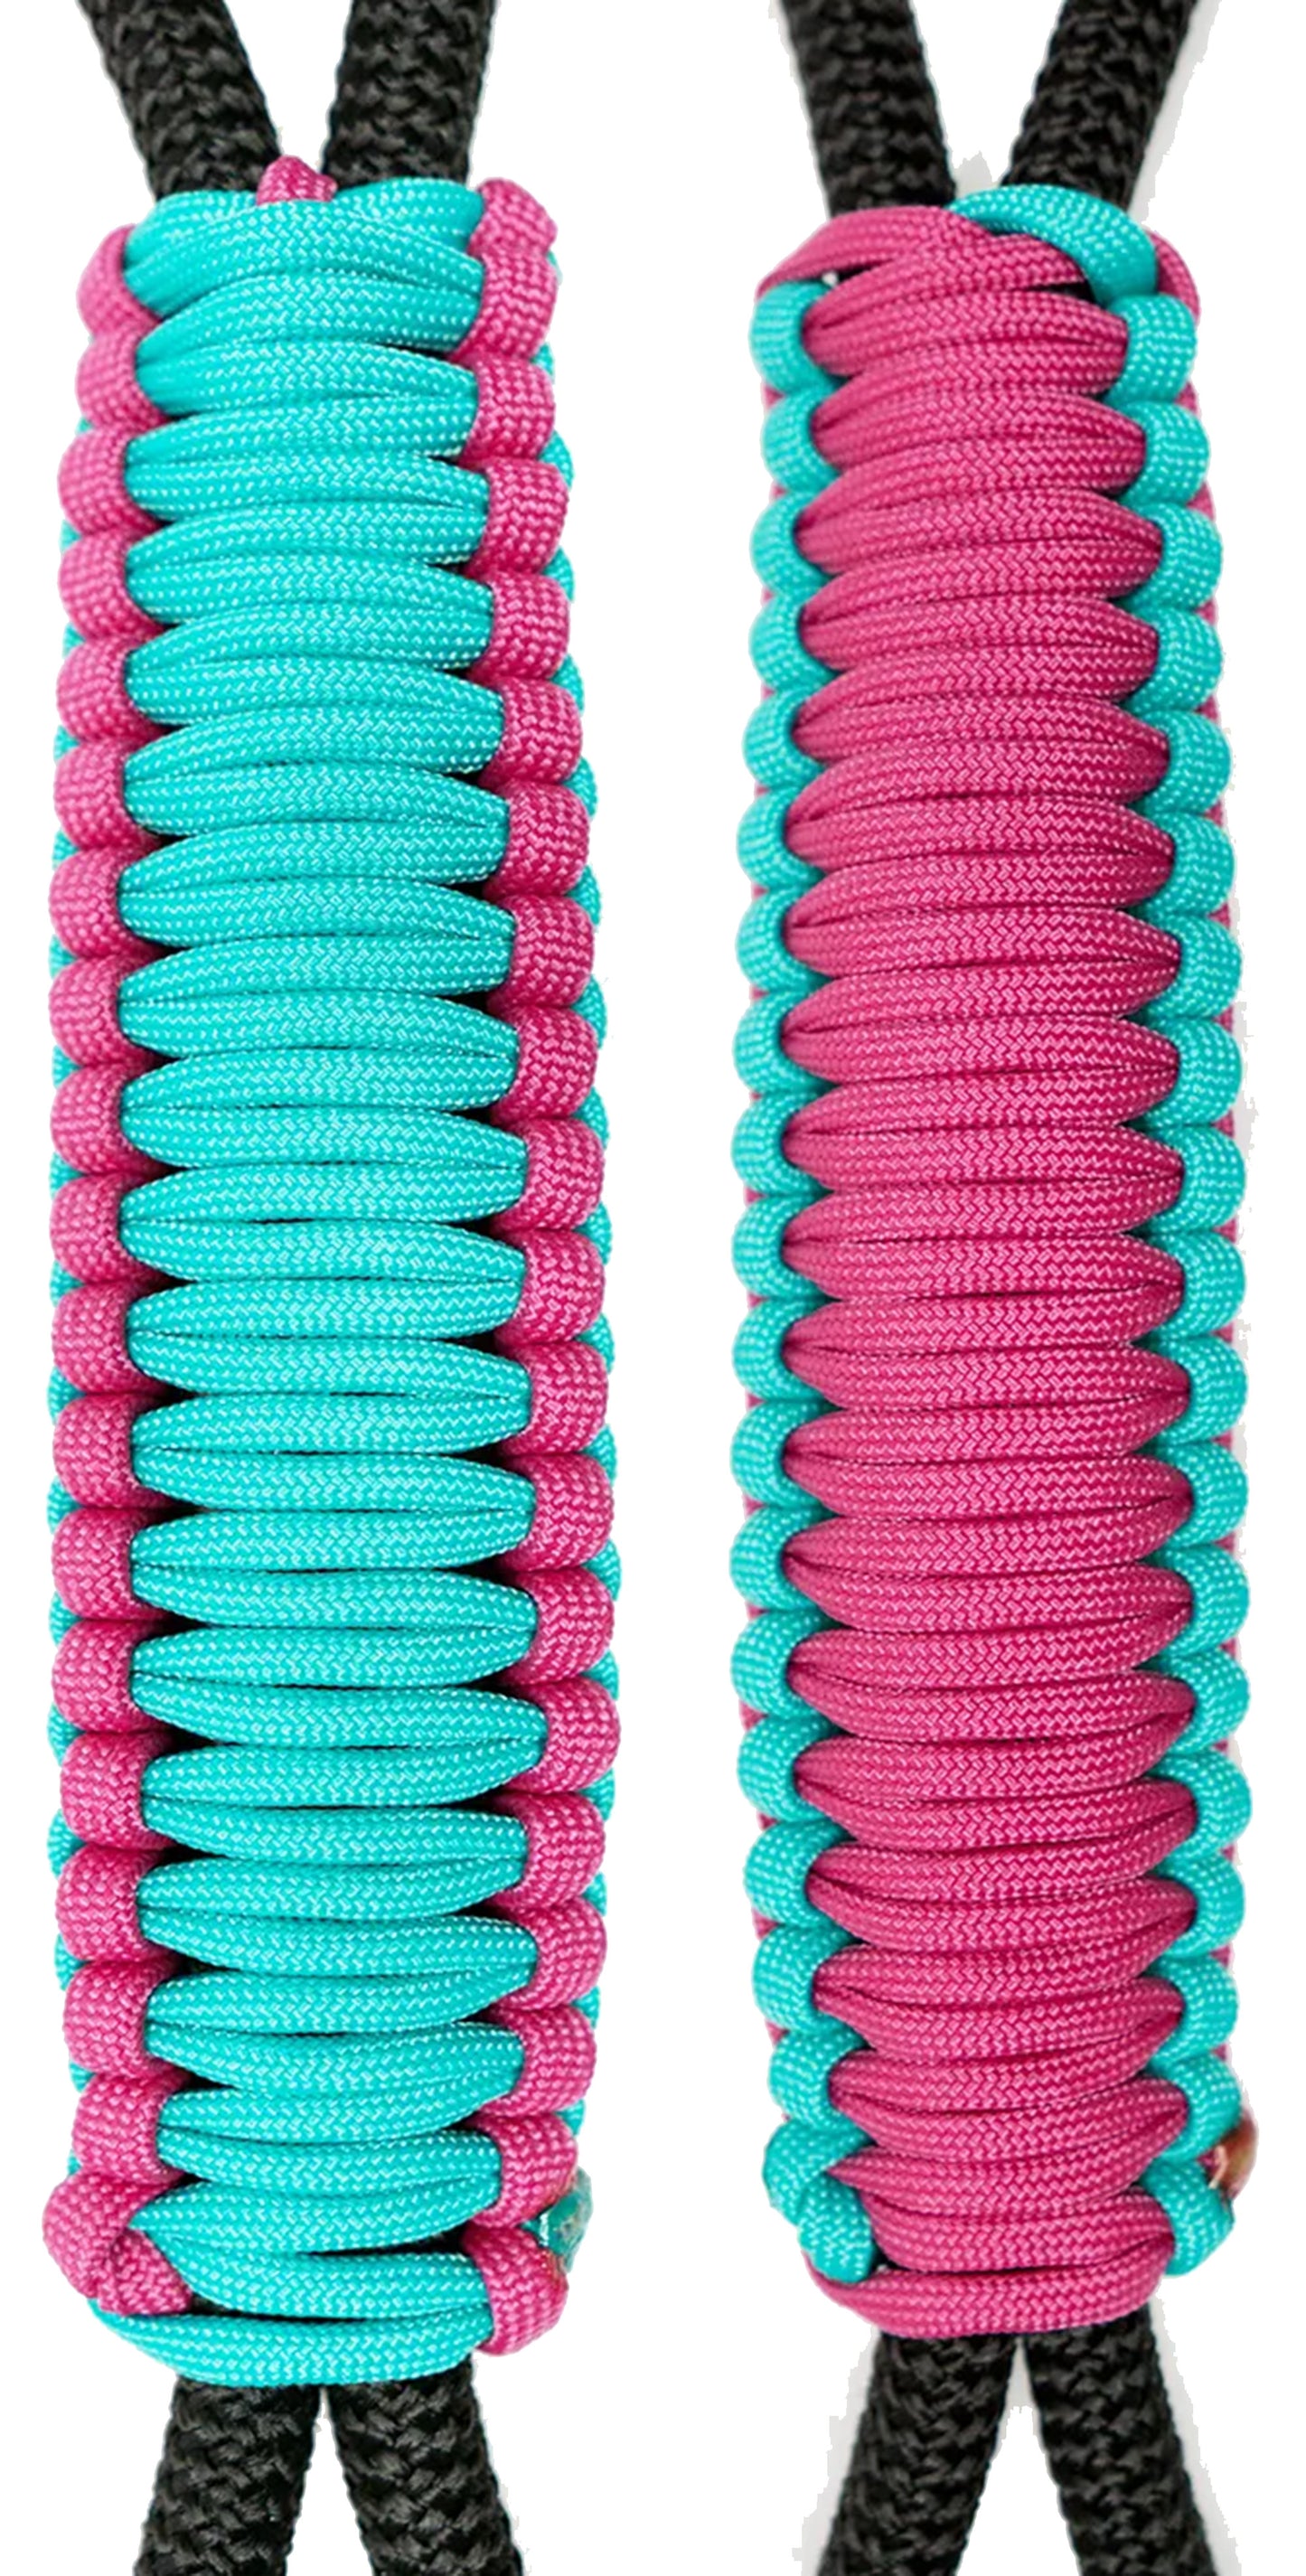 Teal & Fuchsia C017C010 - Paracord Handmade Handles for Stainless Steel Tumblers - Made in USA!